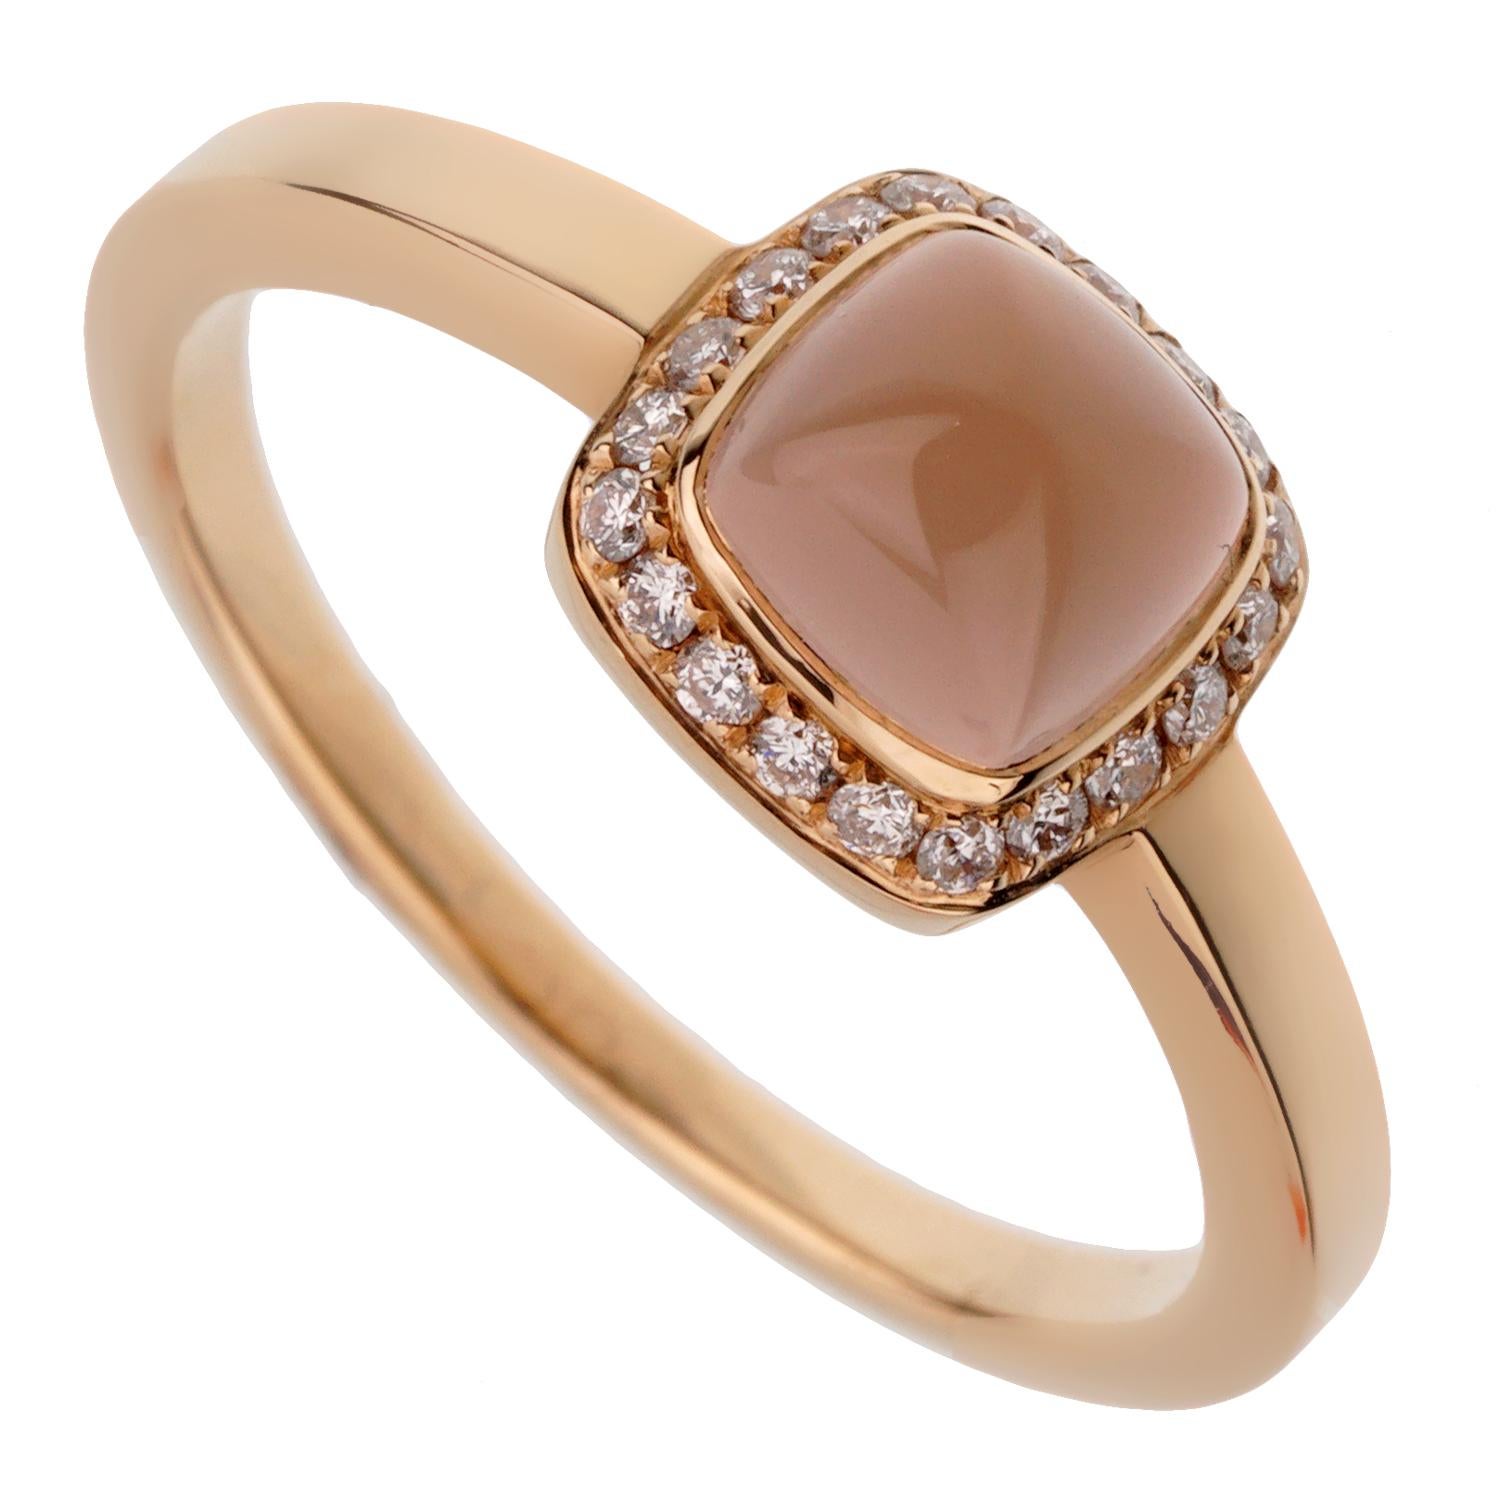 A fabulous brand new Fred of Paris ring showcasing a Rose Quartz adorned with round brilliant cut diamonds in shimmering 18k rose gold. The ring measures a size 4 3/4 and can be resized if needed.